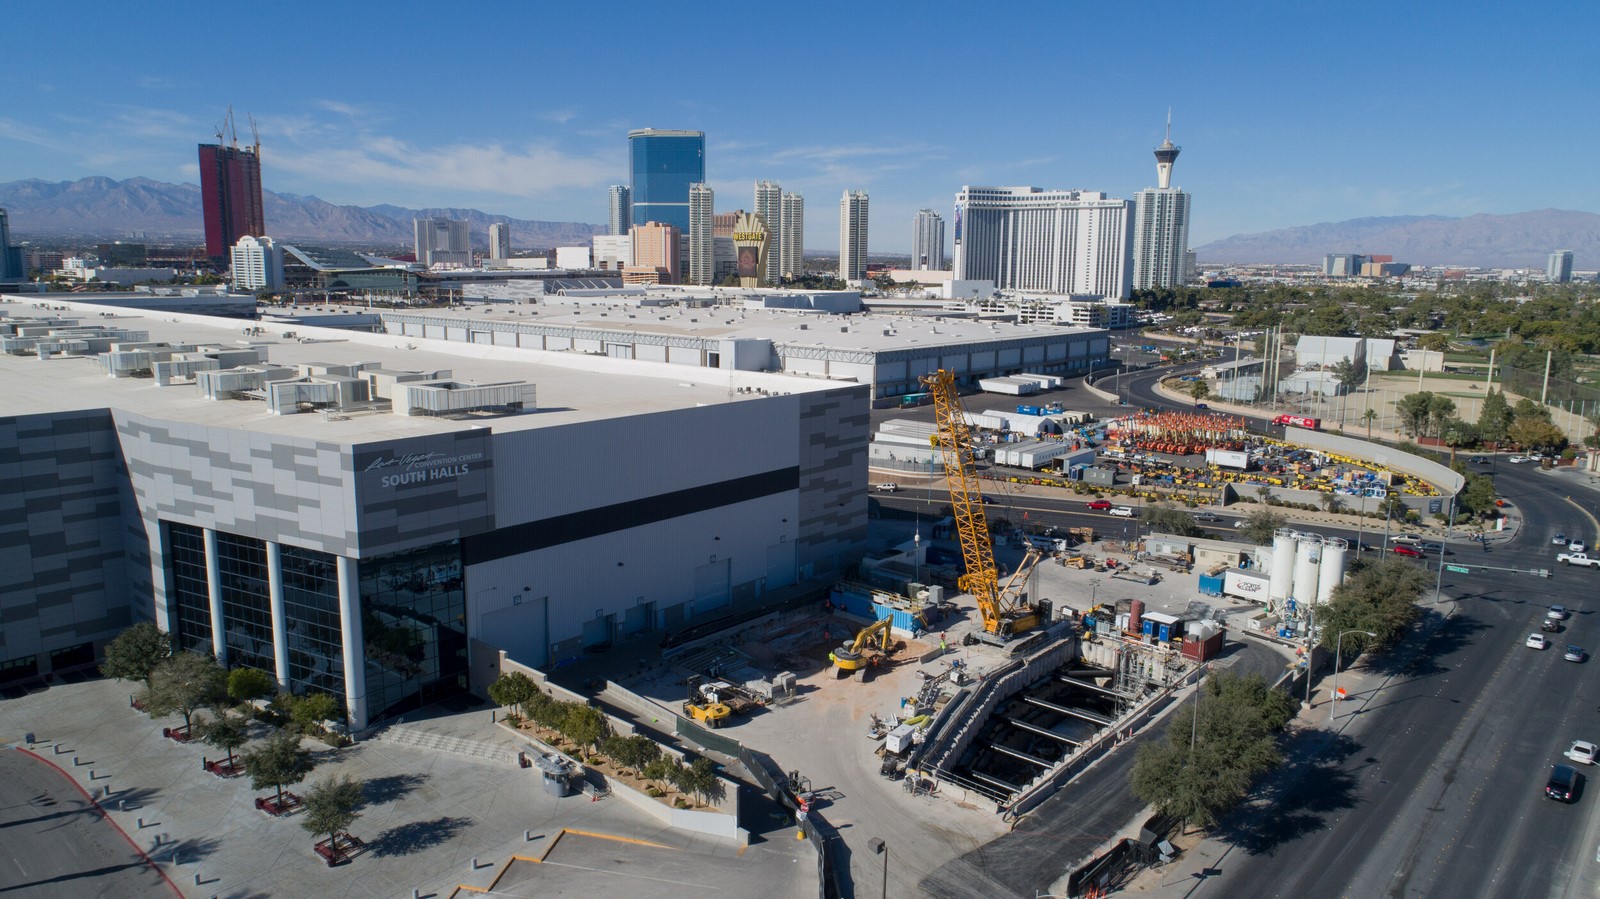 Elon Musk reveals Las Vegas Convention Center Loop station, and its private  shuttles